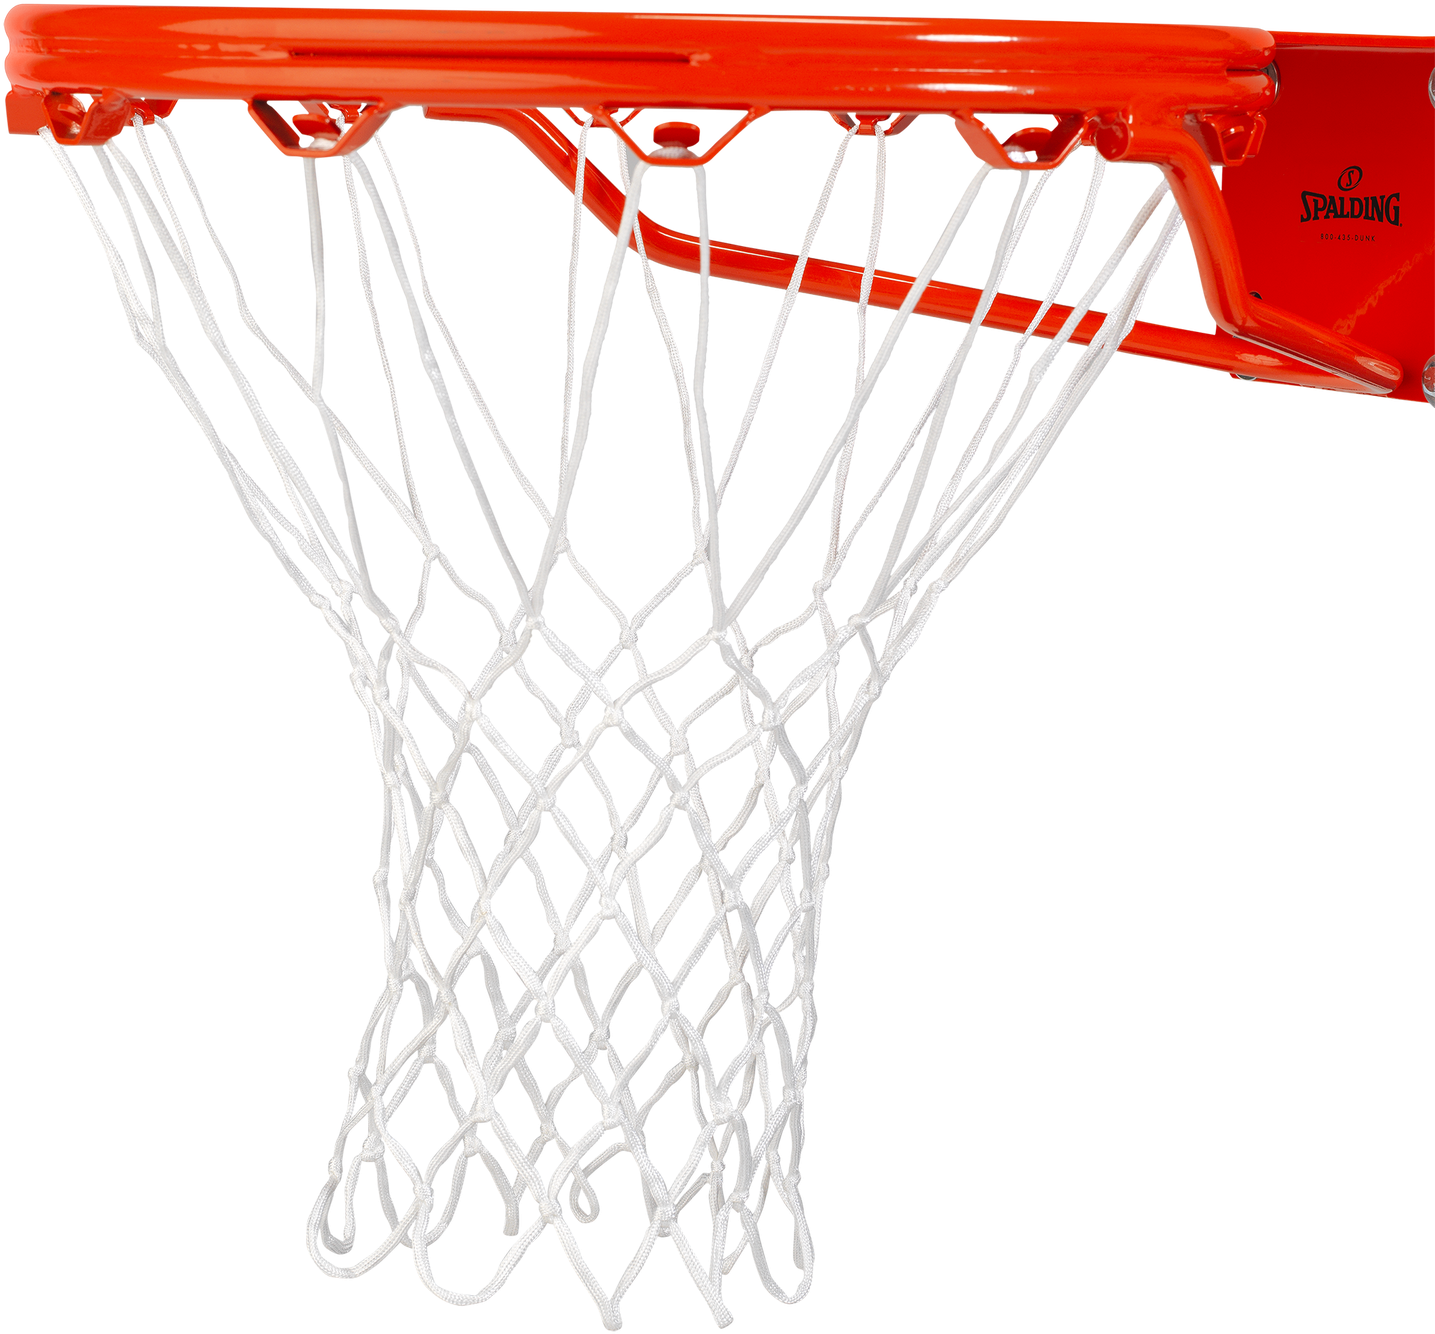 A Basketball Hoop With White Net